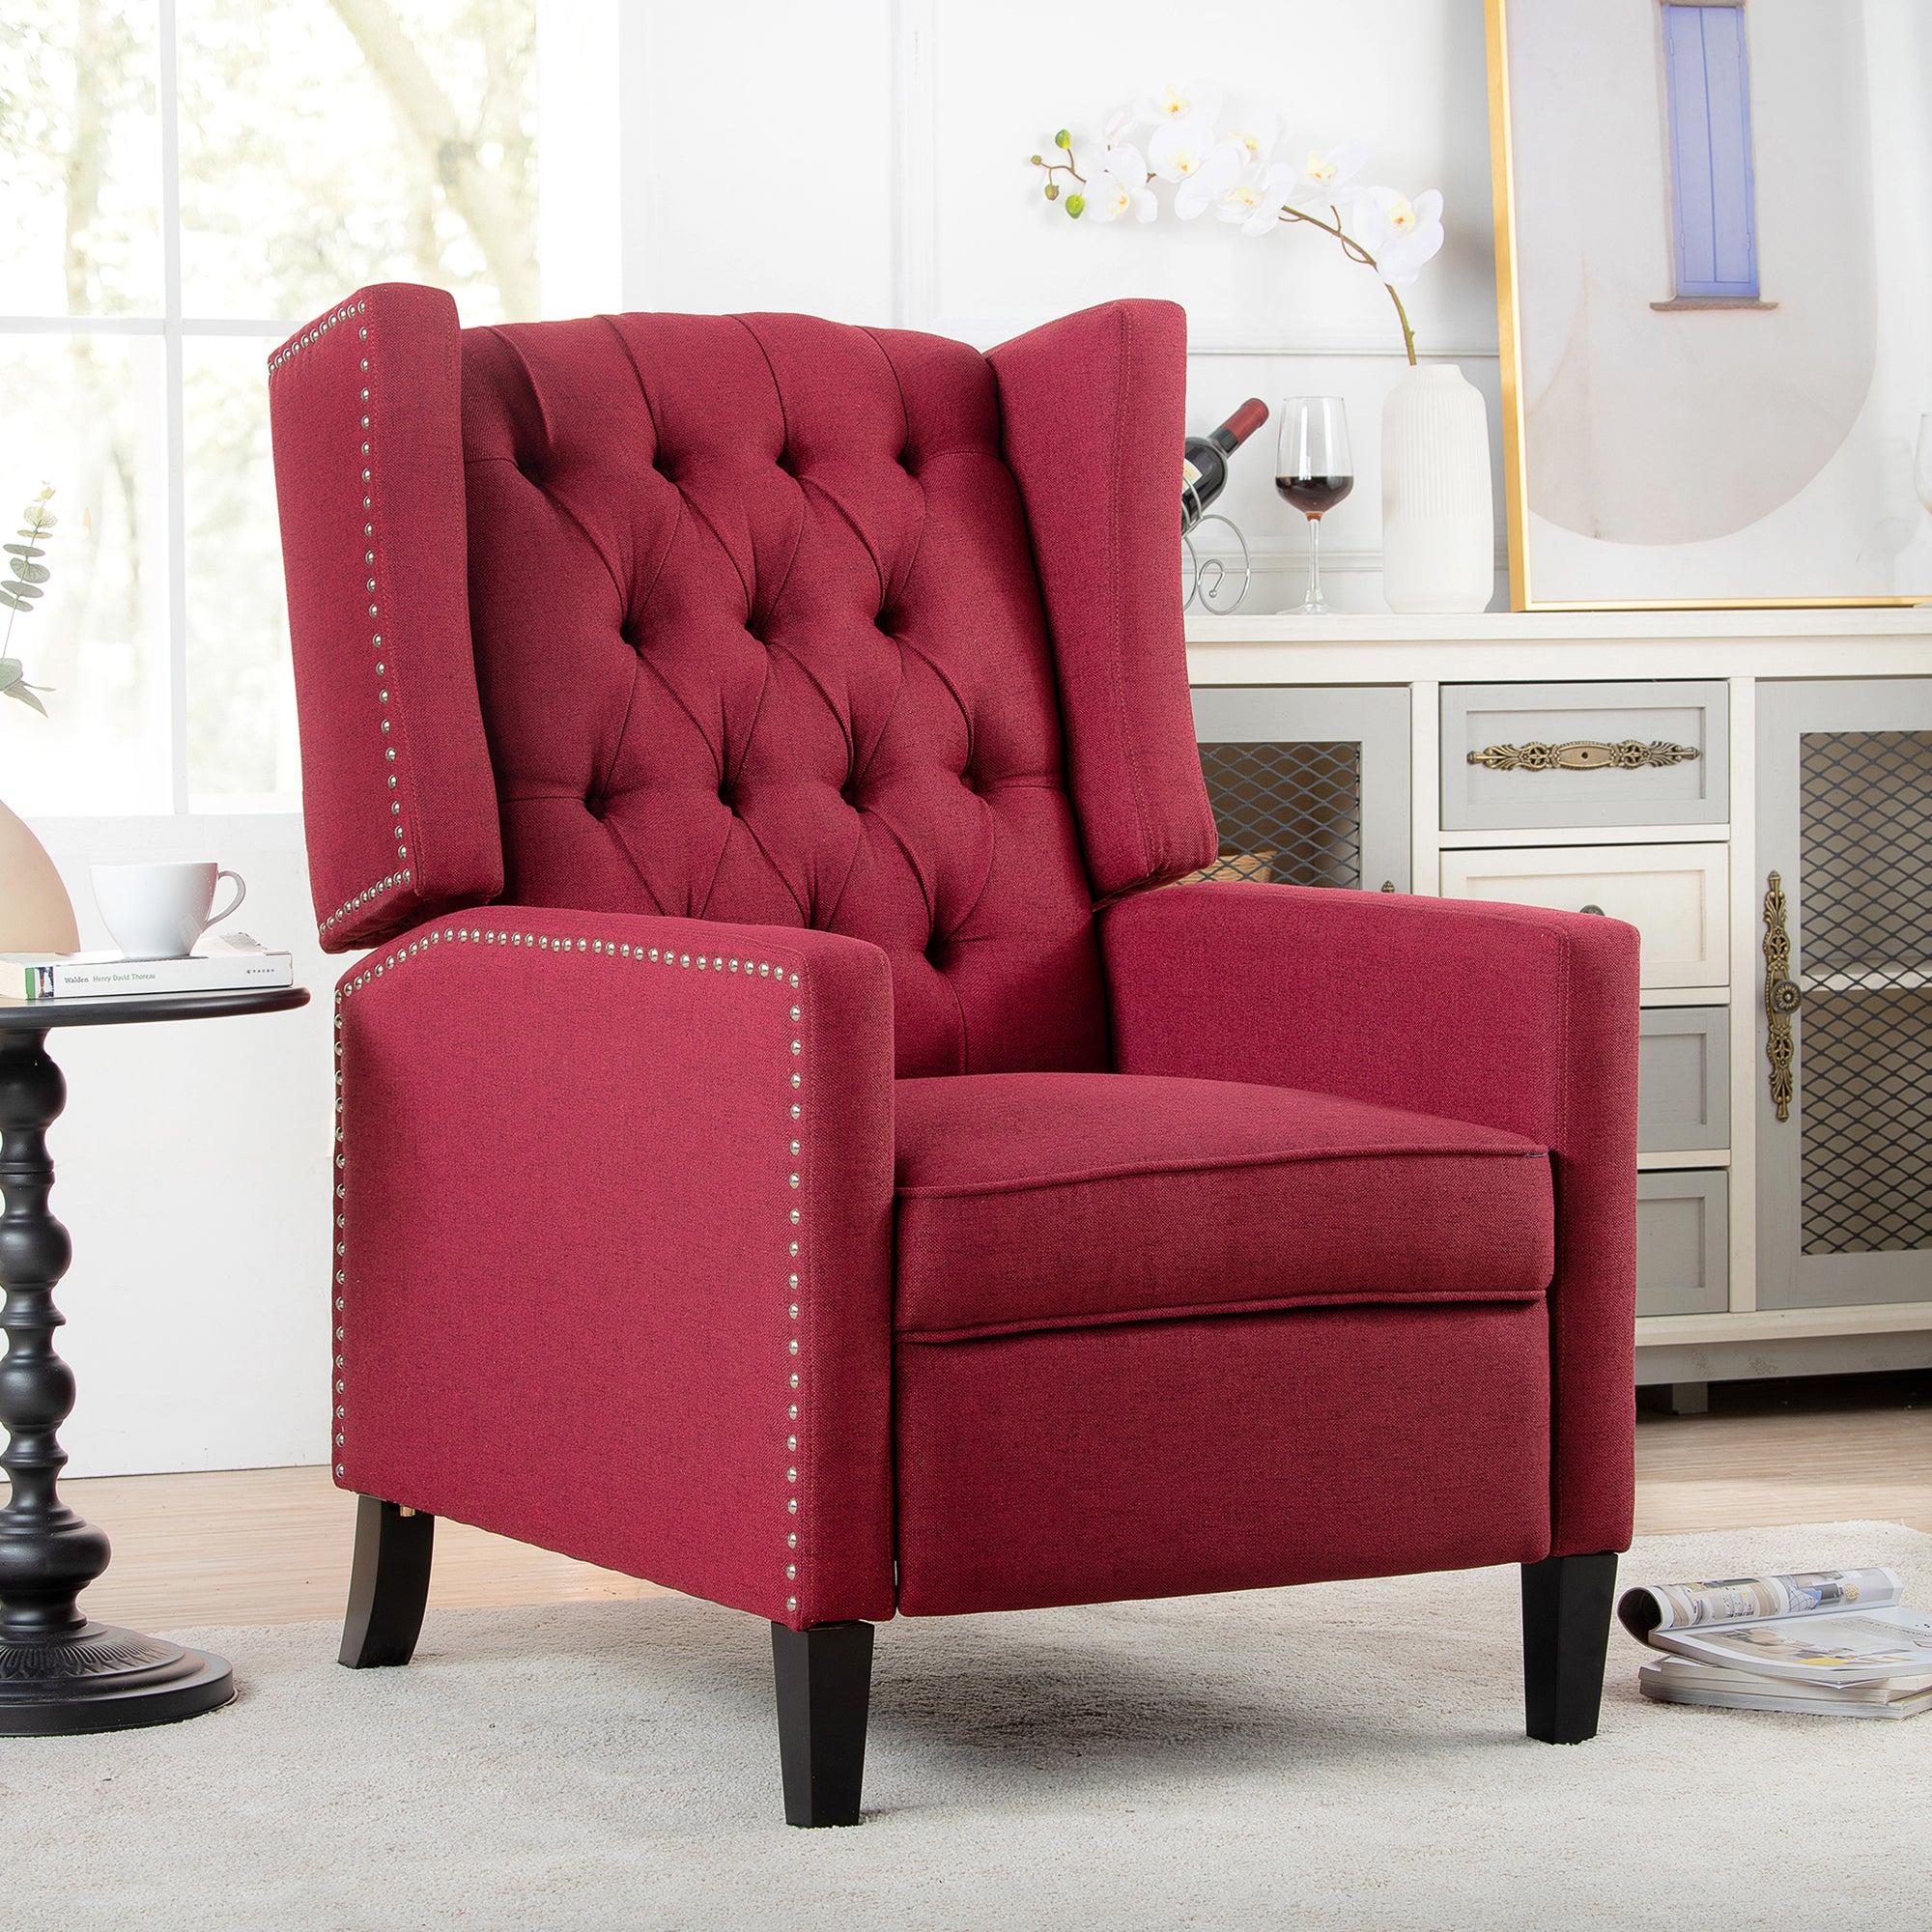 Blaine Red Linen Fabric Pushback Recliner Wing Chair With Nailhead Trim